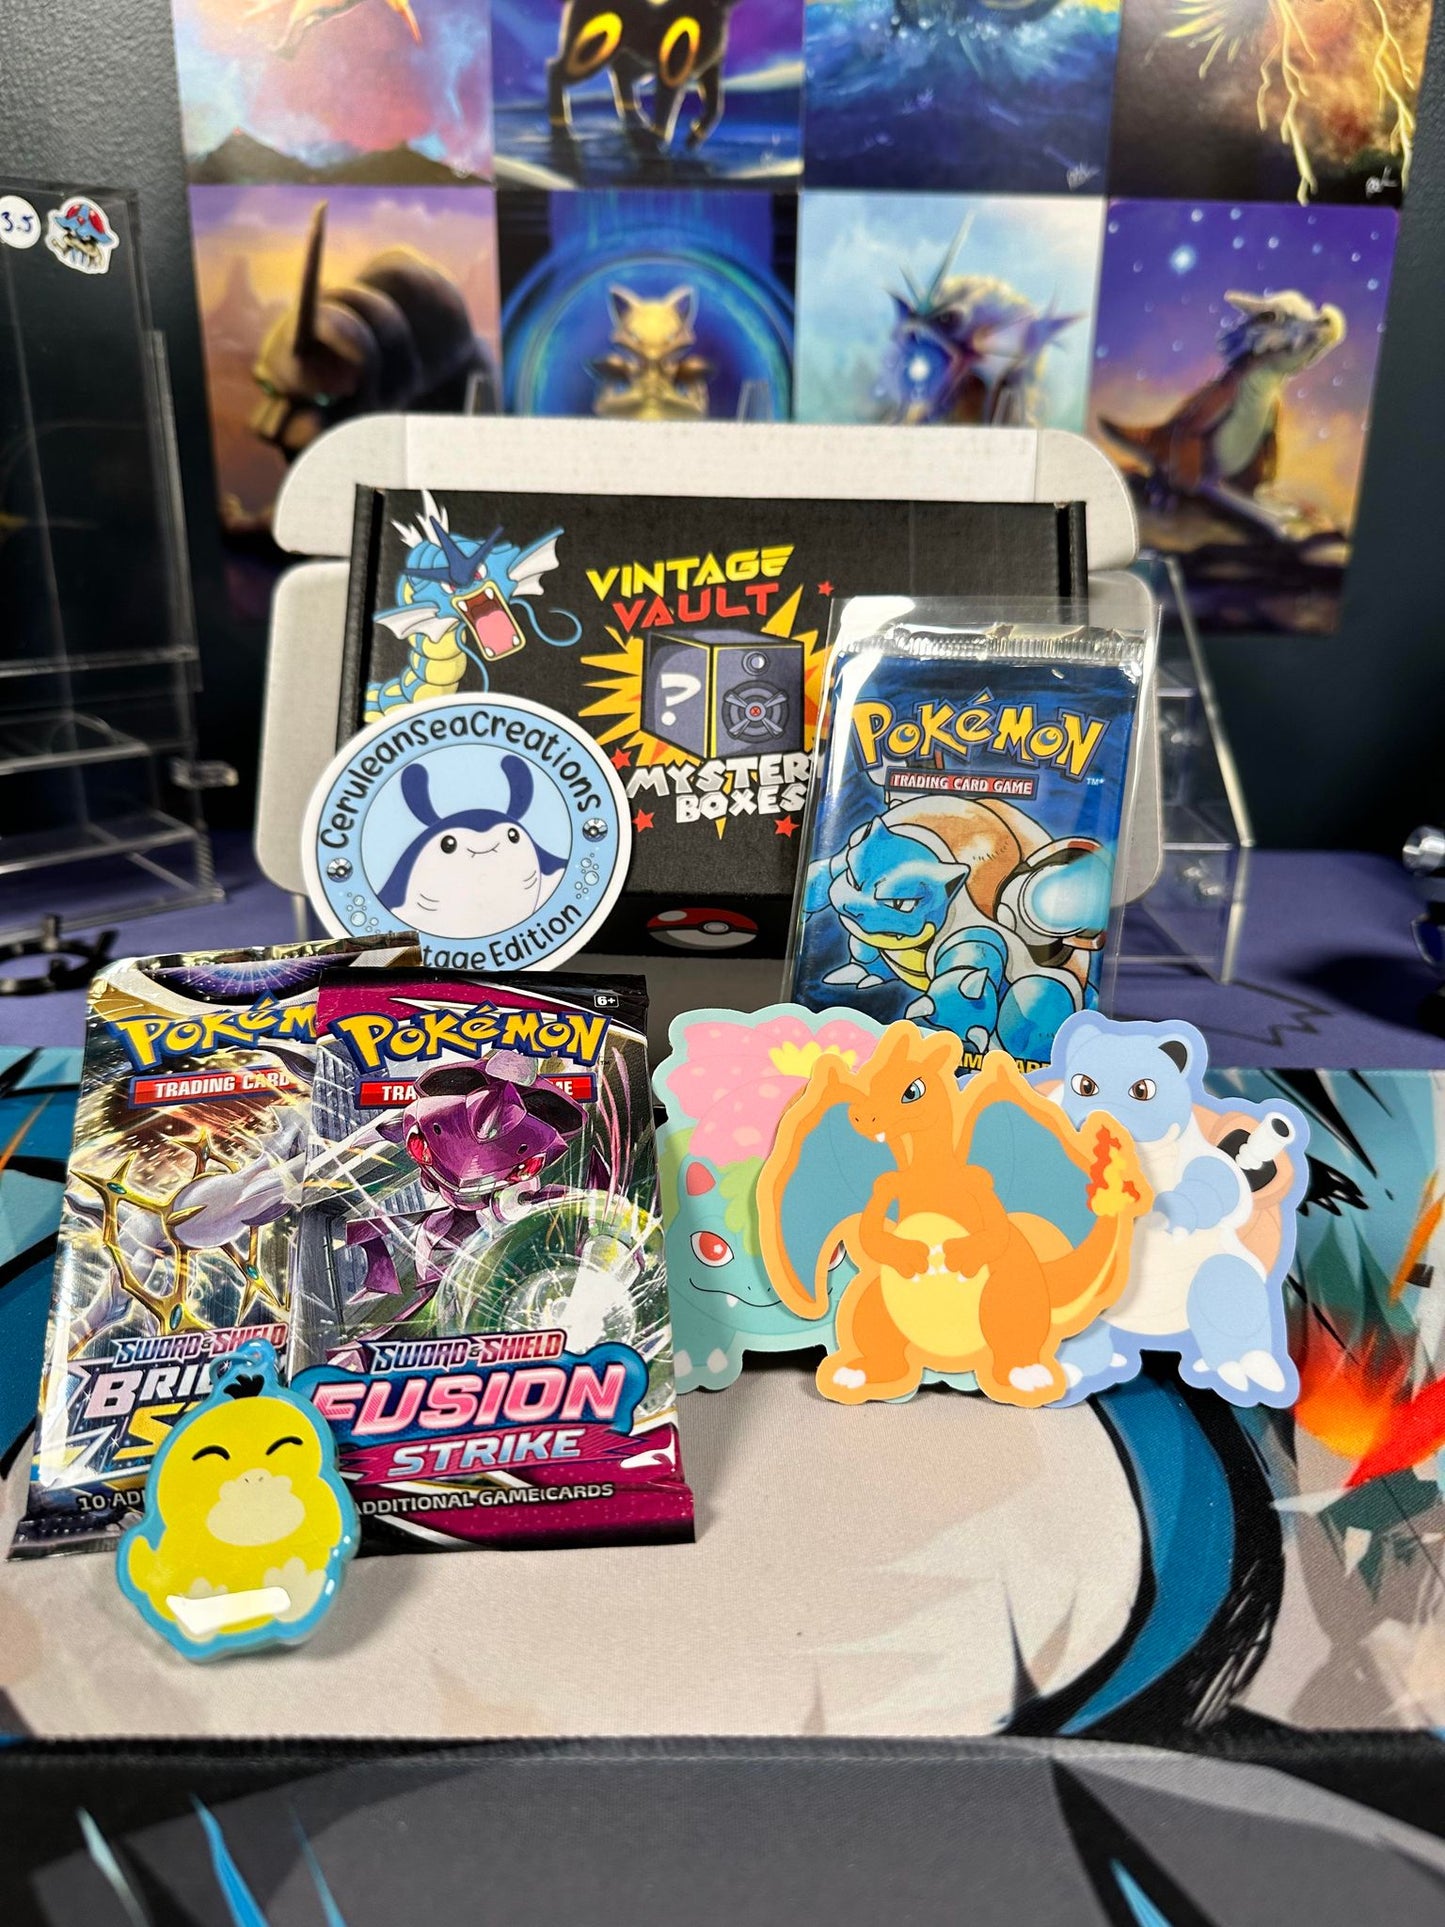 Mystery Box - CERULEAN EDITION! - Guaranteed WoTC Booster Pack in every box!! - Round 3 - DM on Instagram @VintageVaultPokemon for discounts!